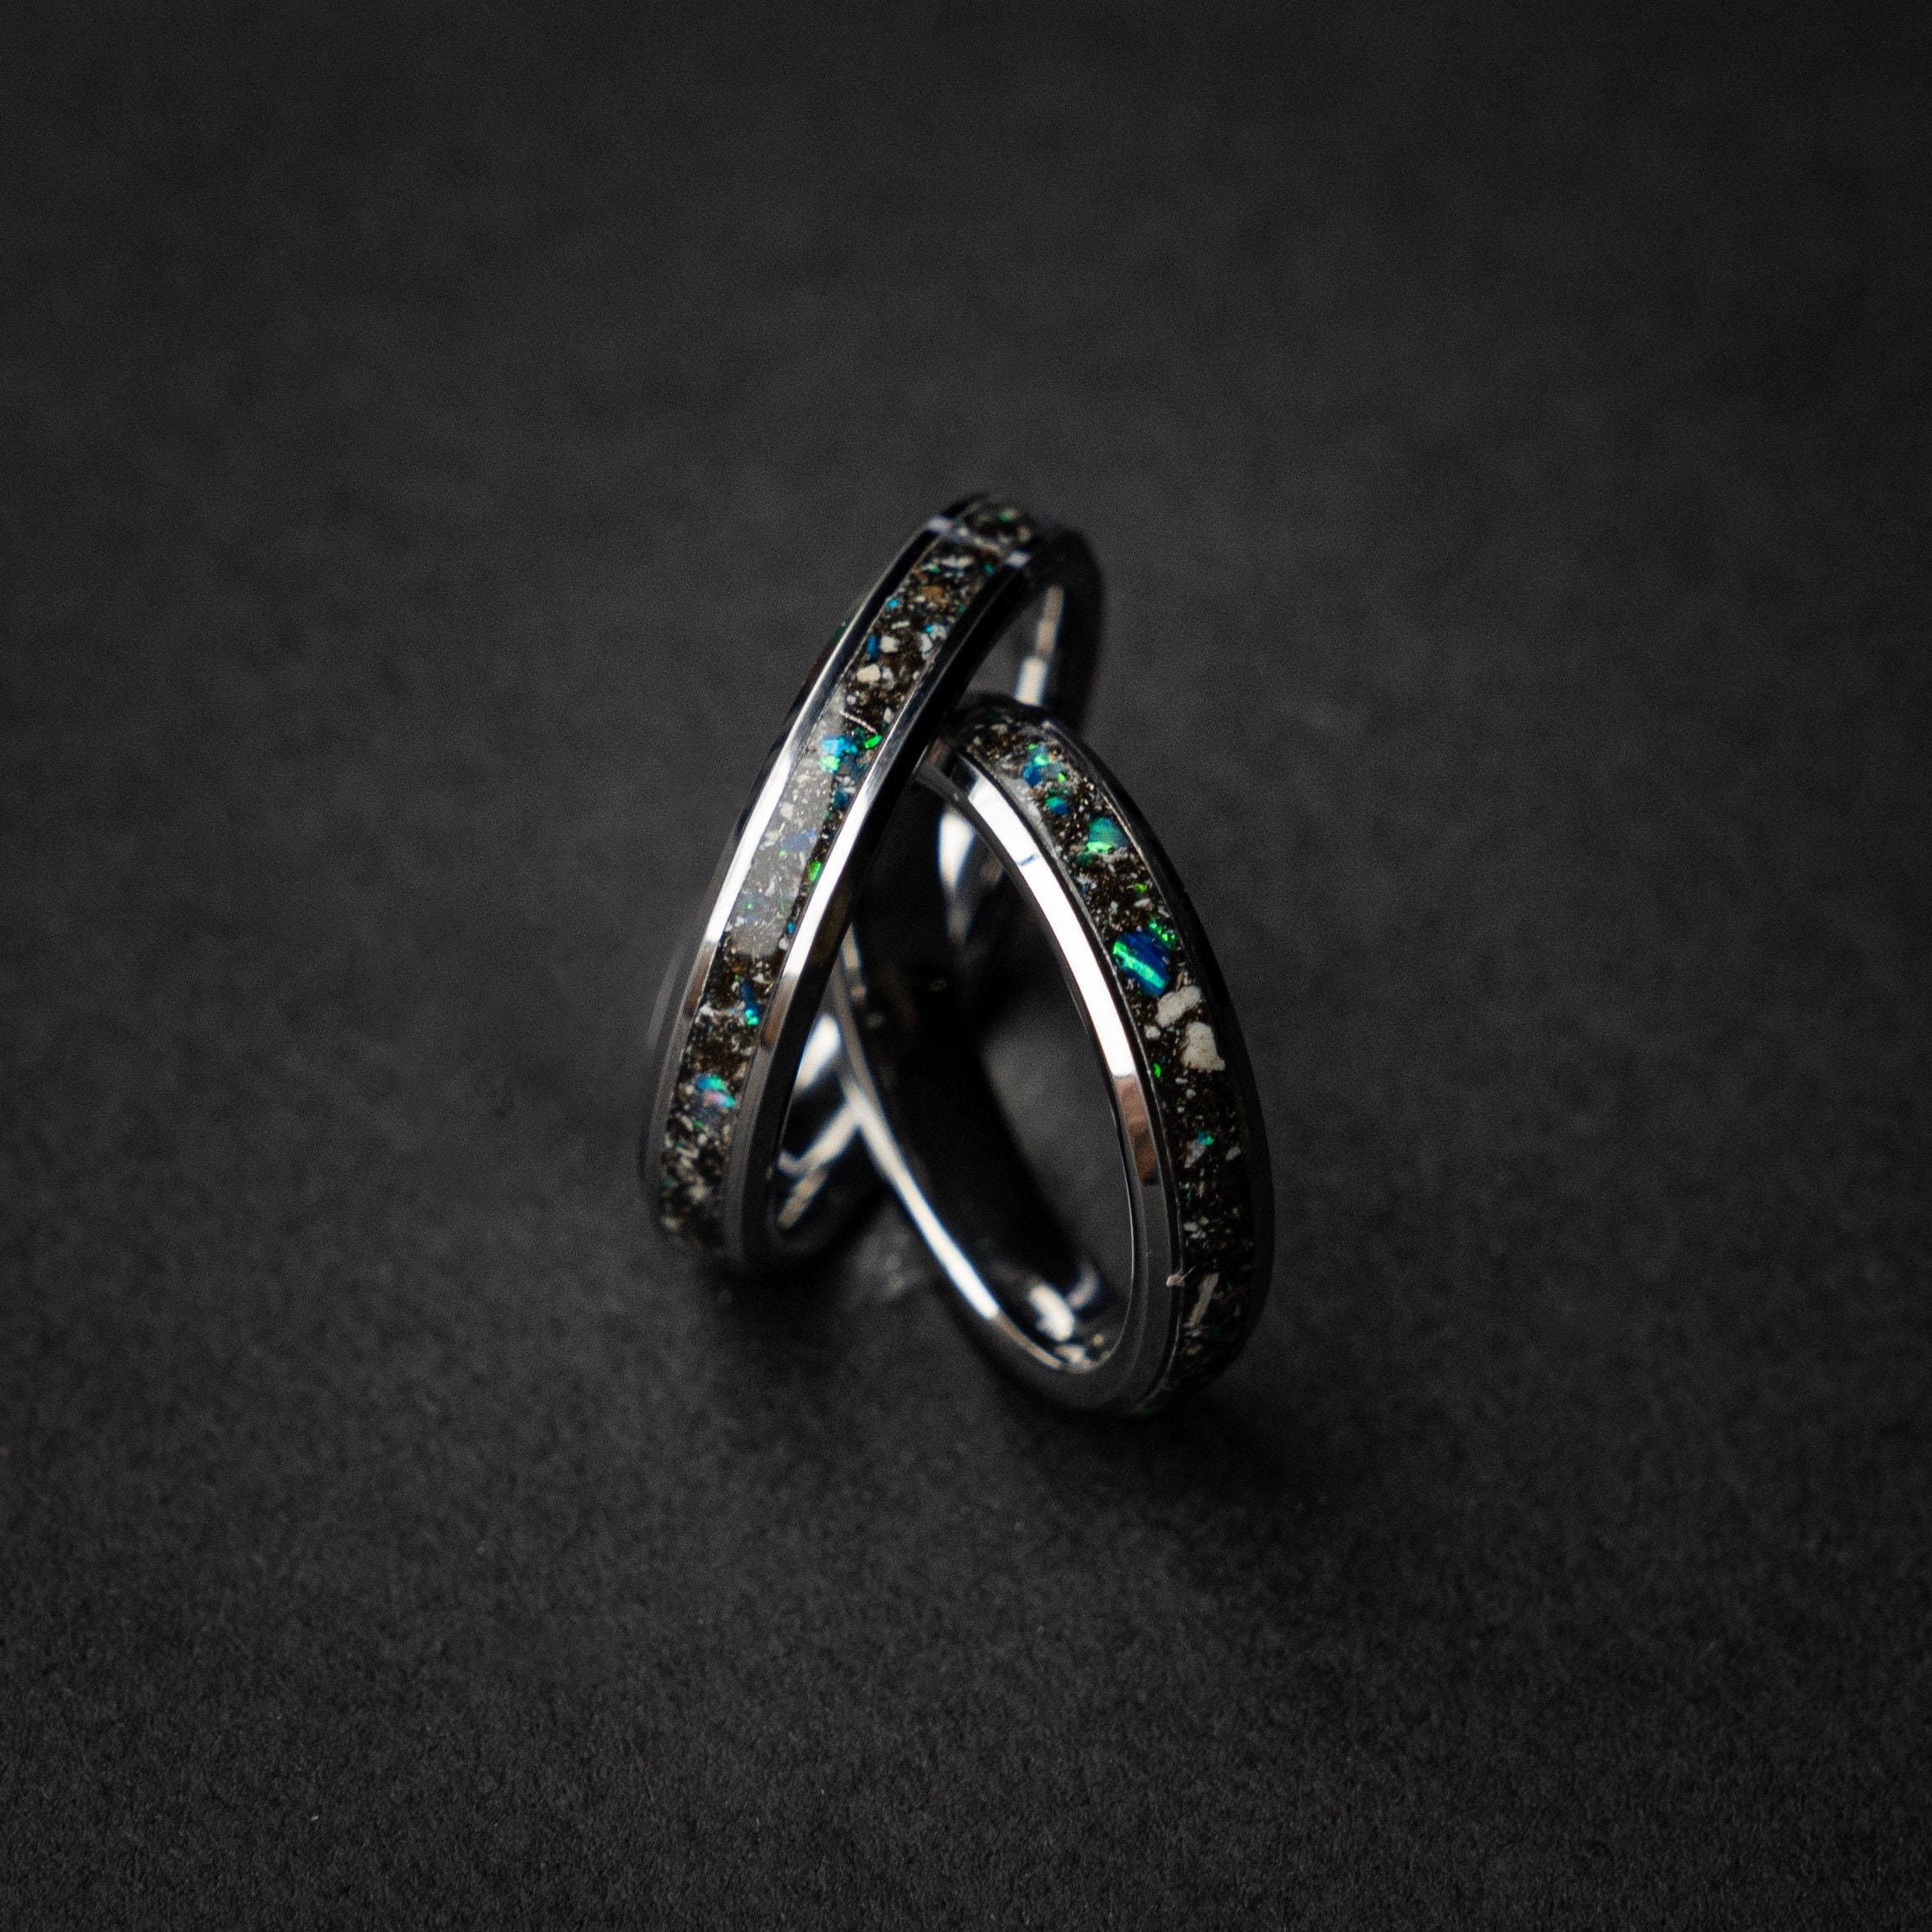 Spinosaurus wedding ring set with Blue galaxy opal and meteorite dust, Best friend rings, his and hers couples ring | Decazithumbnail